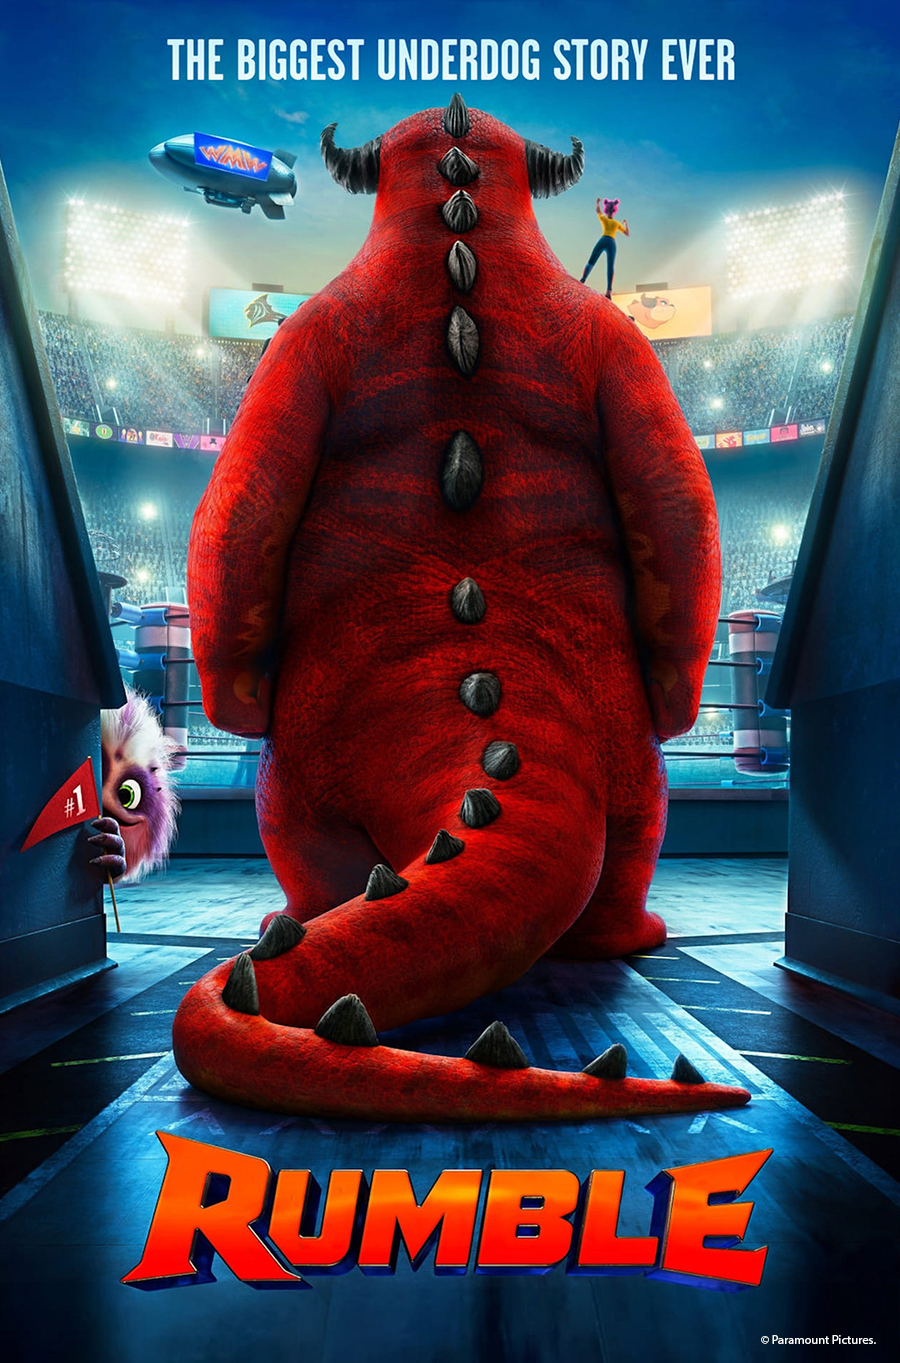 A big red, furry monster standing at a stadium entrance. Text at the top reads "the biggest underdog story ever." Text at the bottom reads "Rumble"